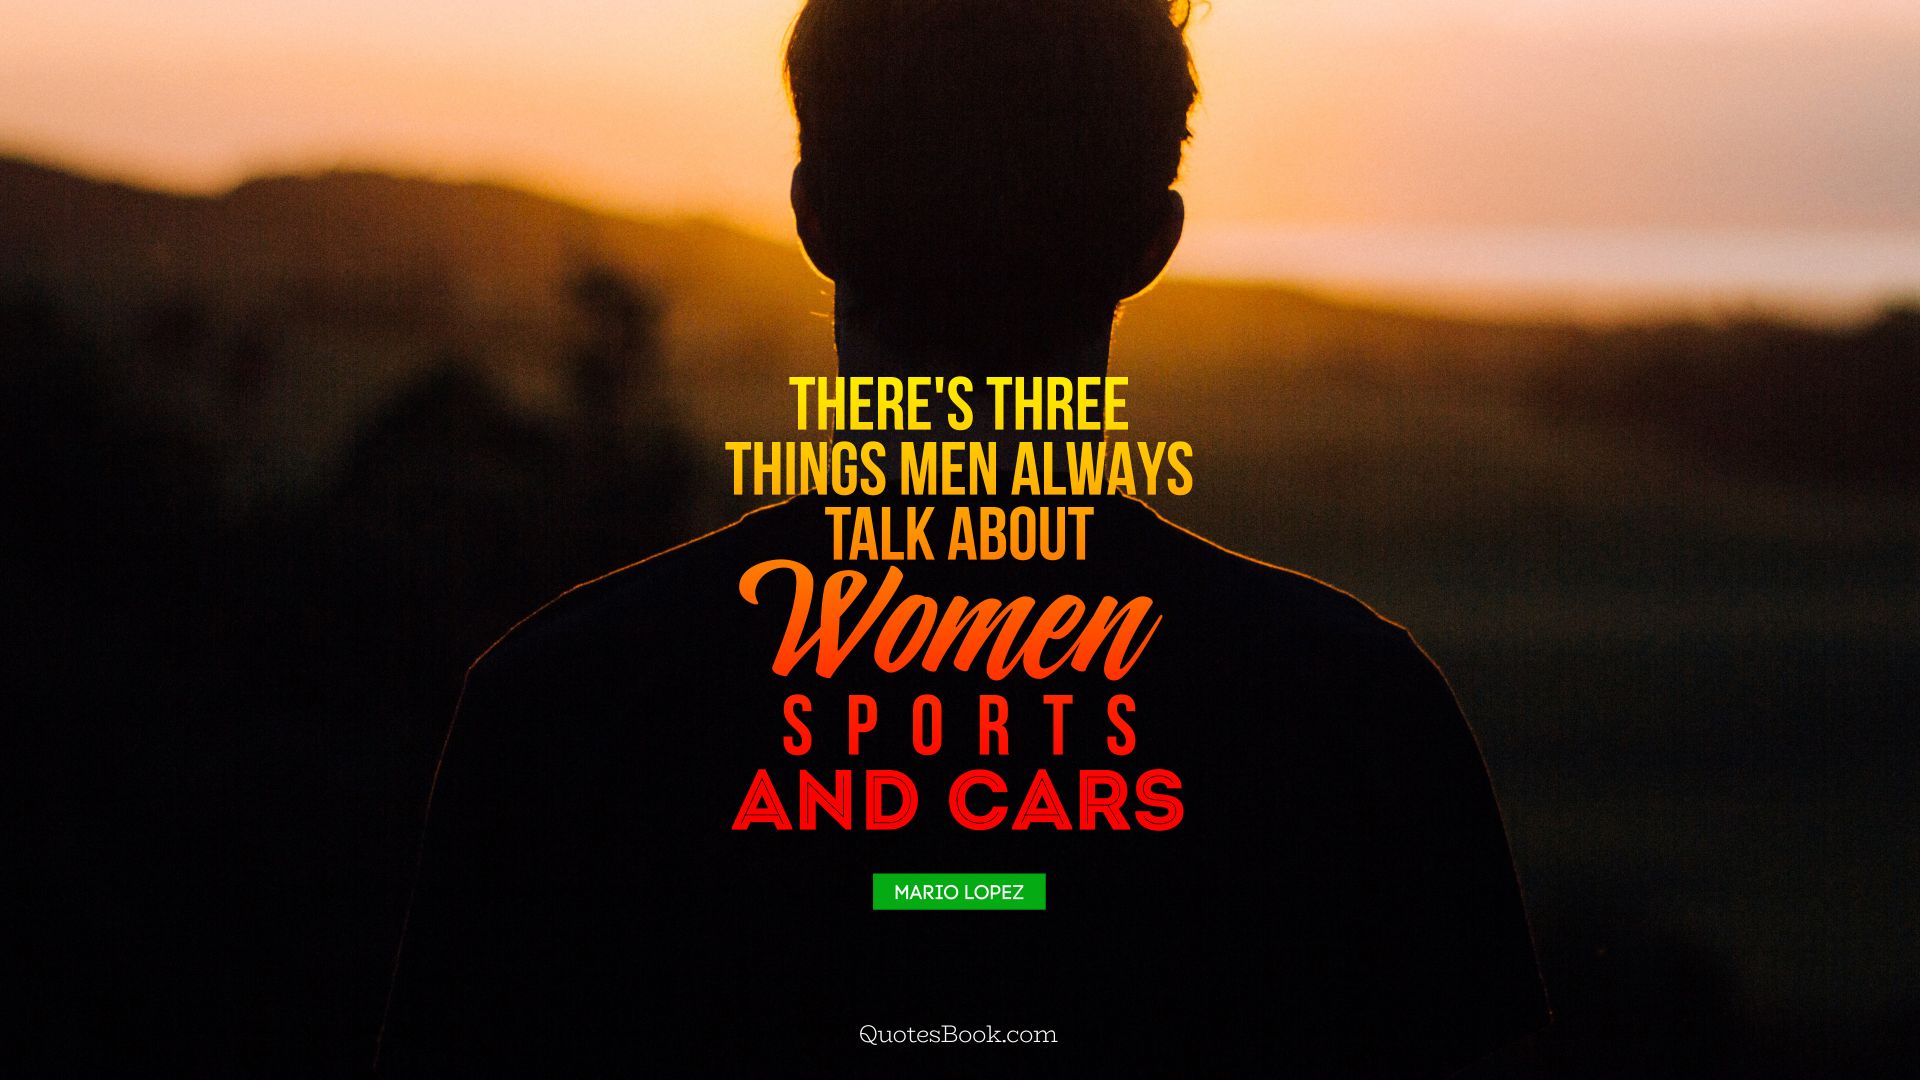 There's three things men always talk about - women, sports, and cars. - Quote by Mario Lopez